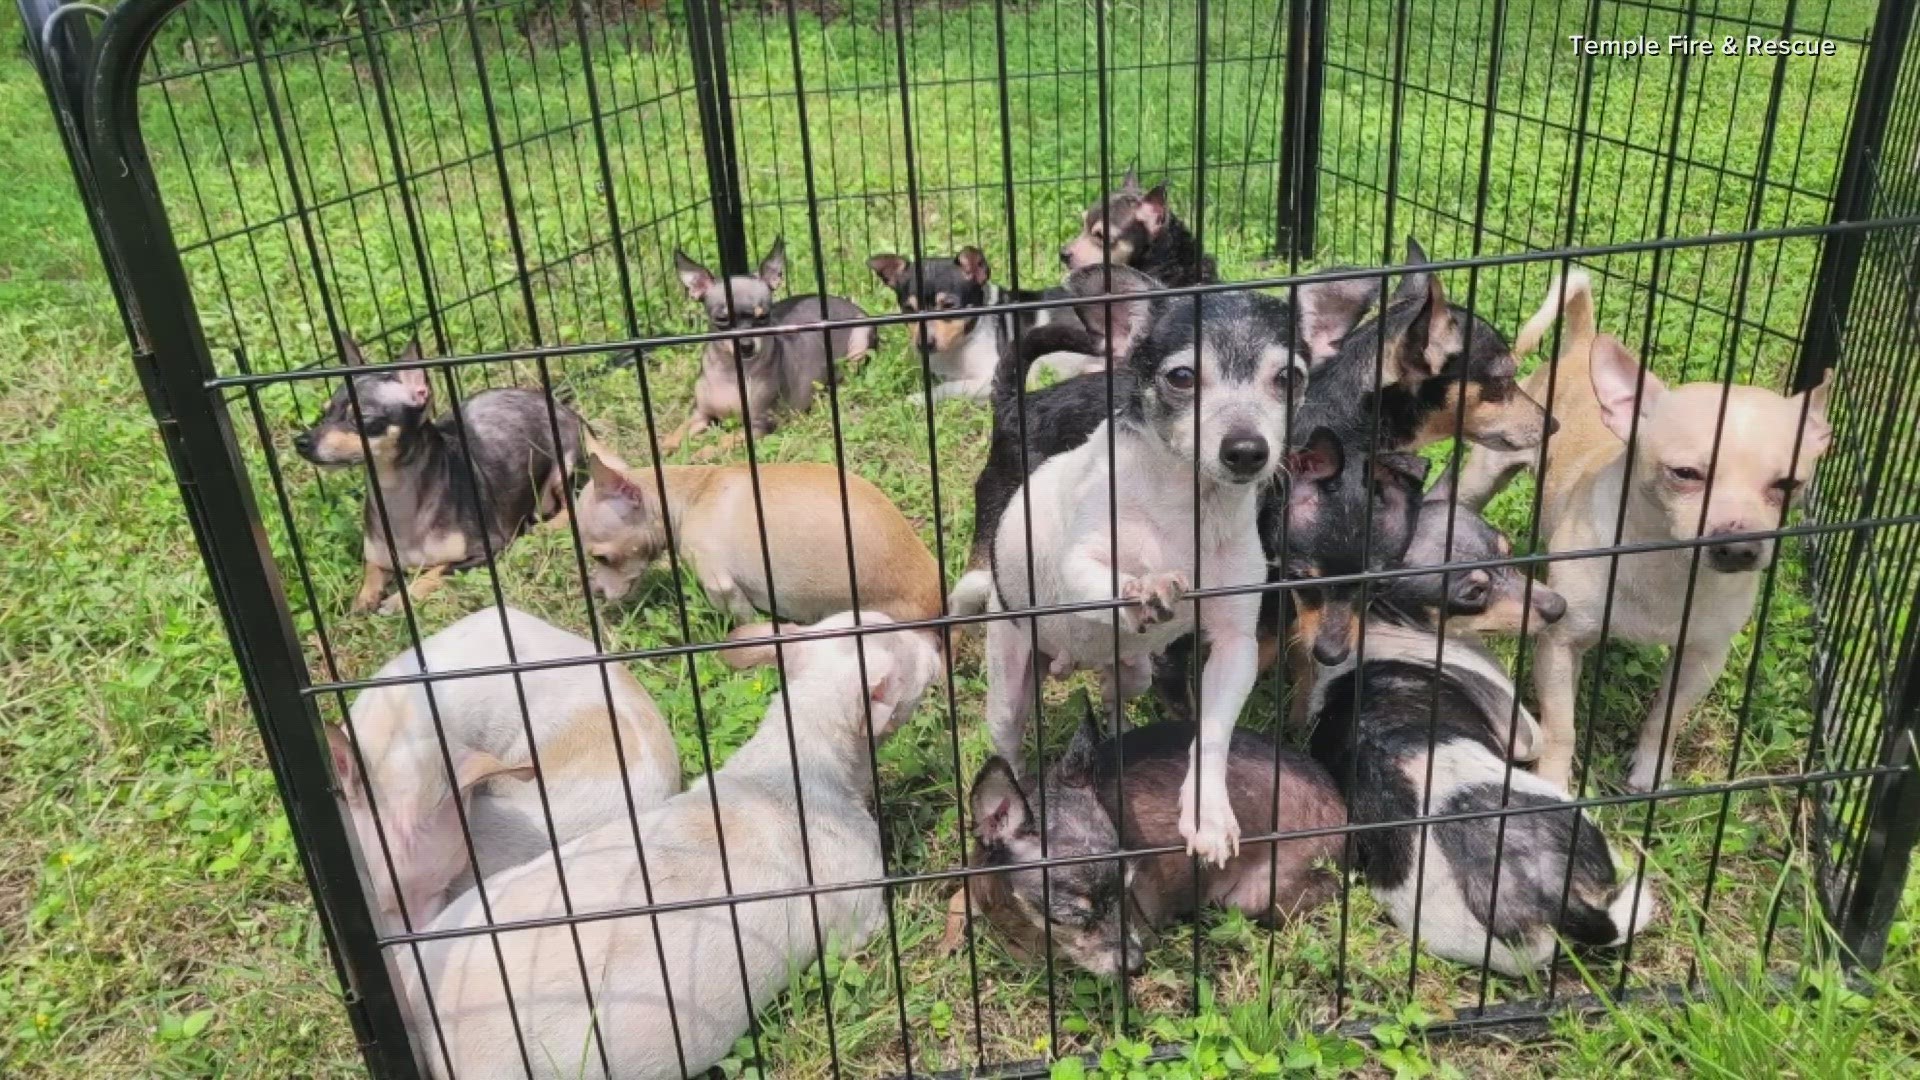 Firefighters were reportedly able to save 20 of the dogs, and Animal Services is working to care for them.